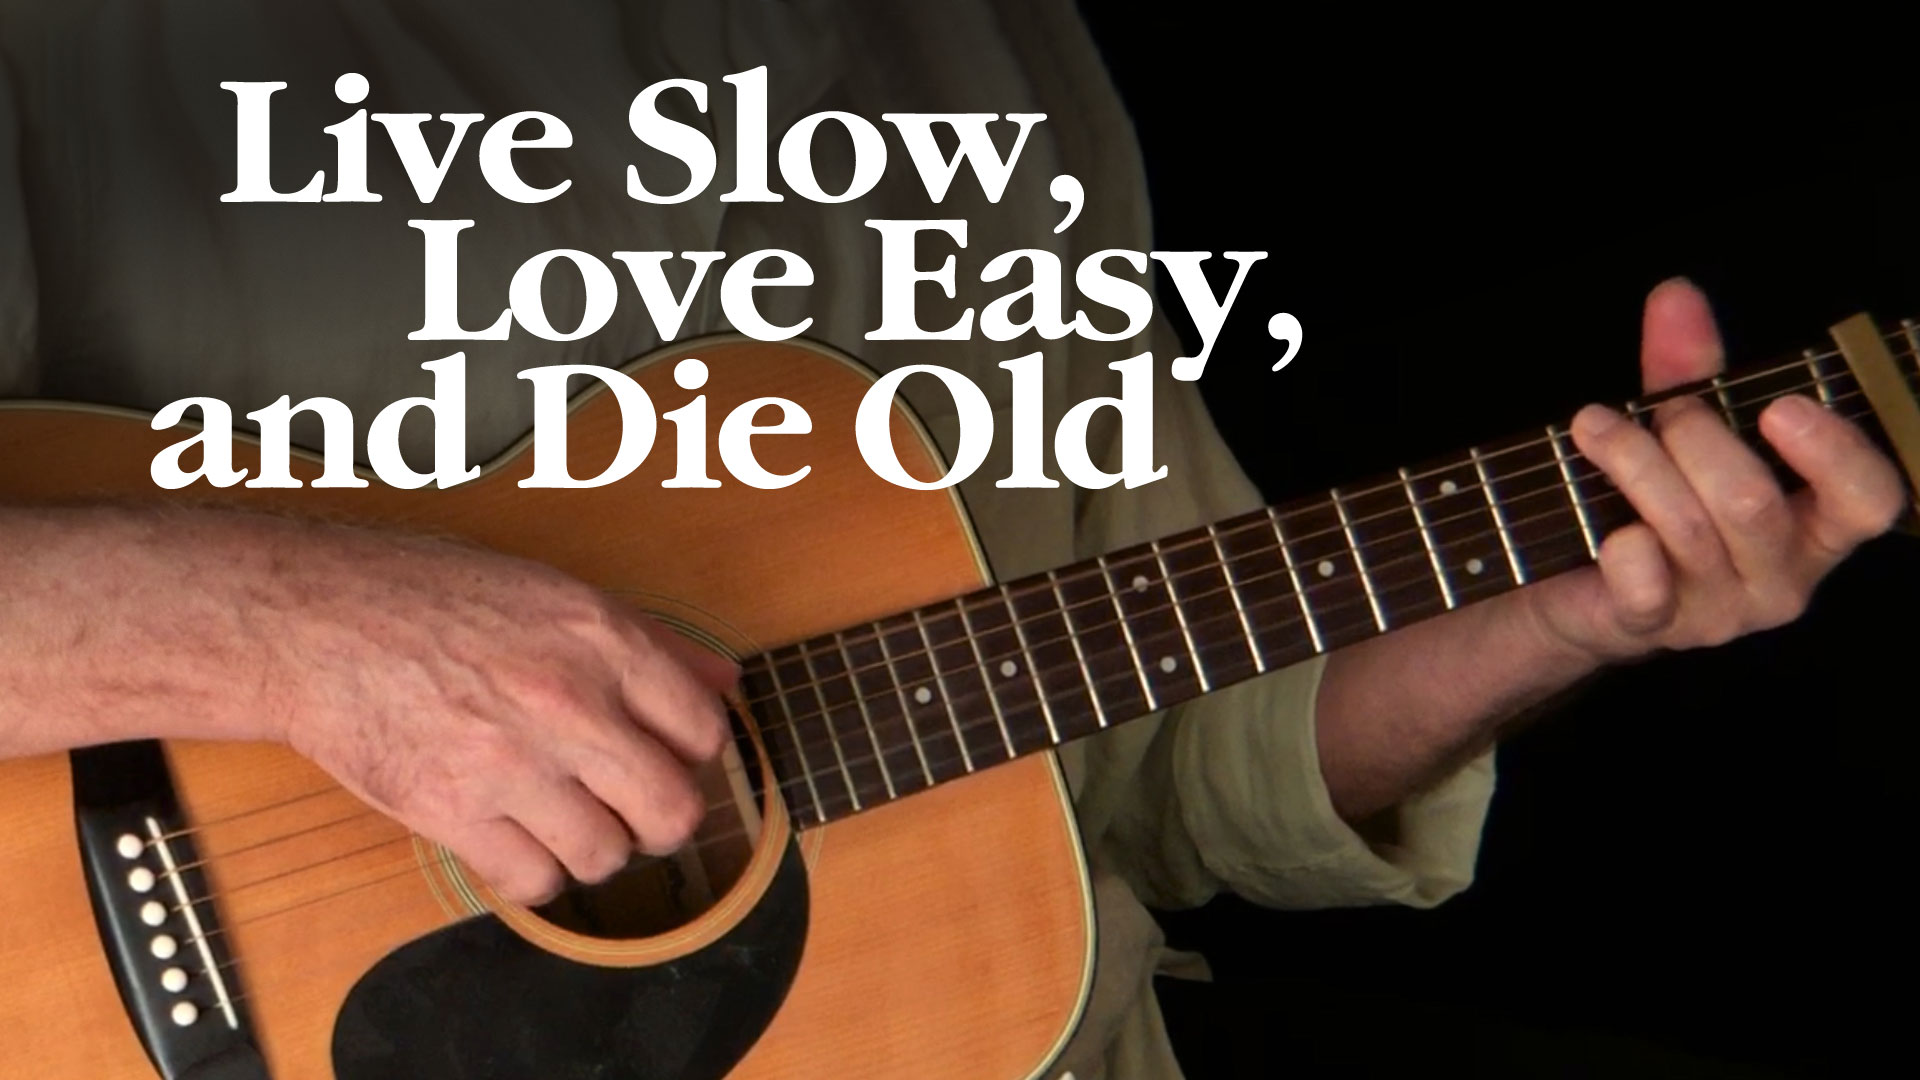 Live Slow, Love Easy, and Die Old by Eric Wrobbel